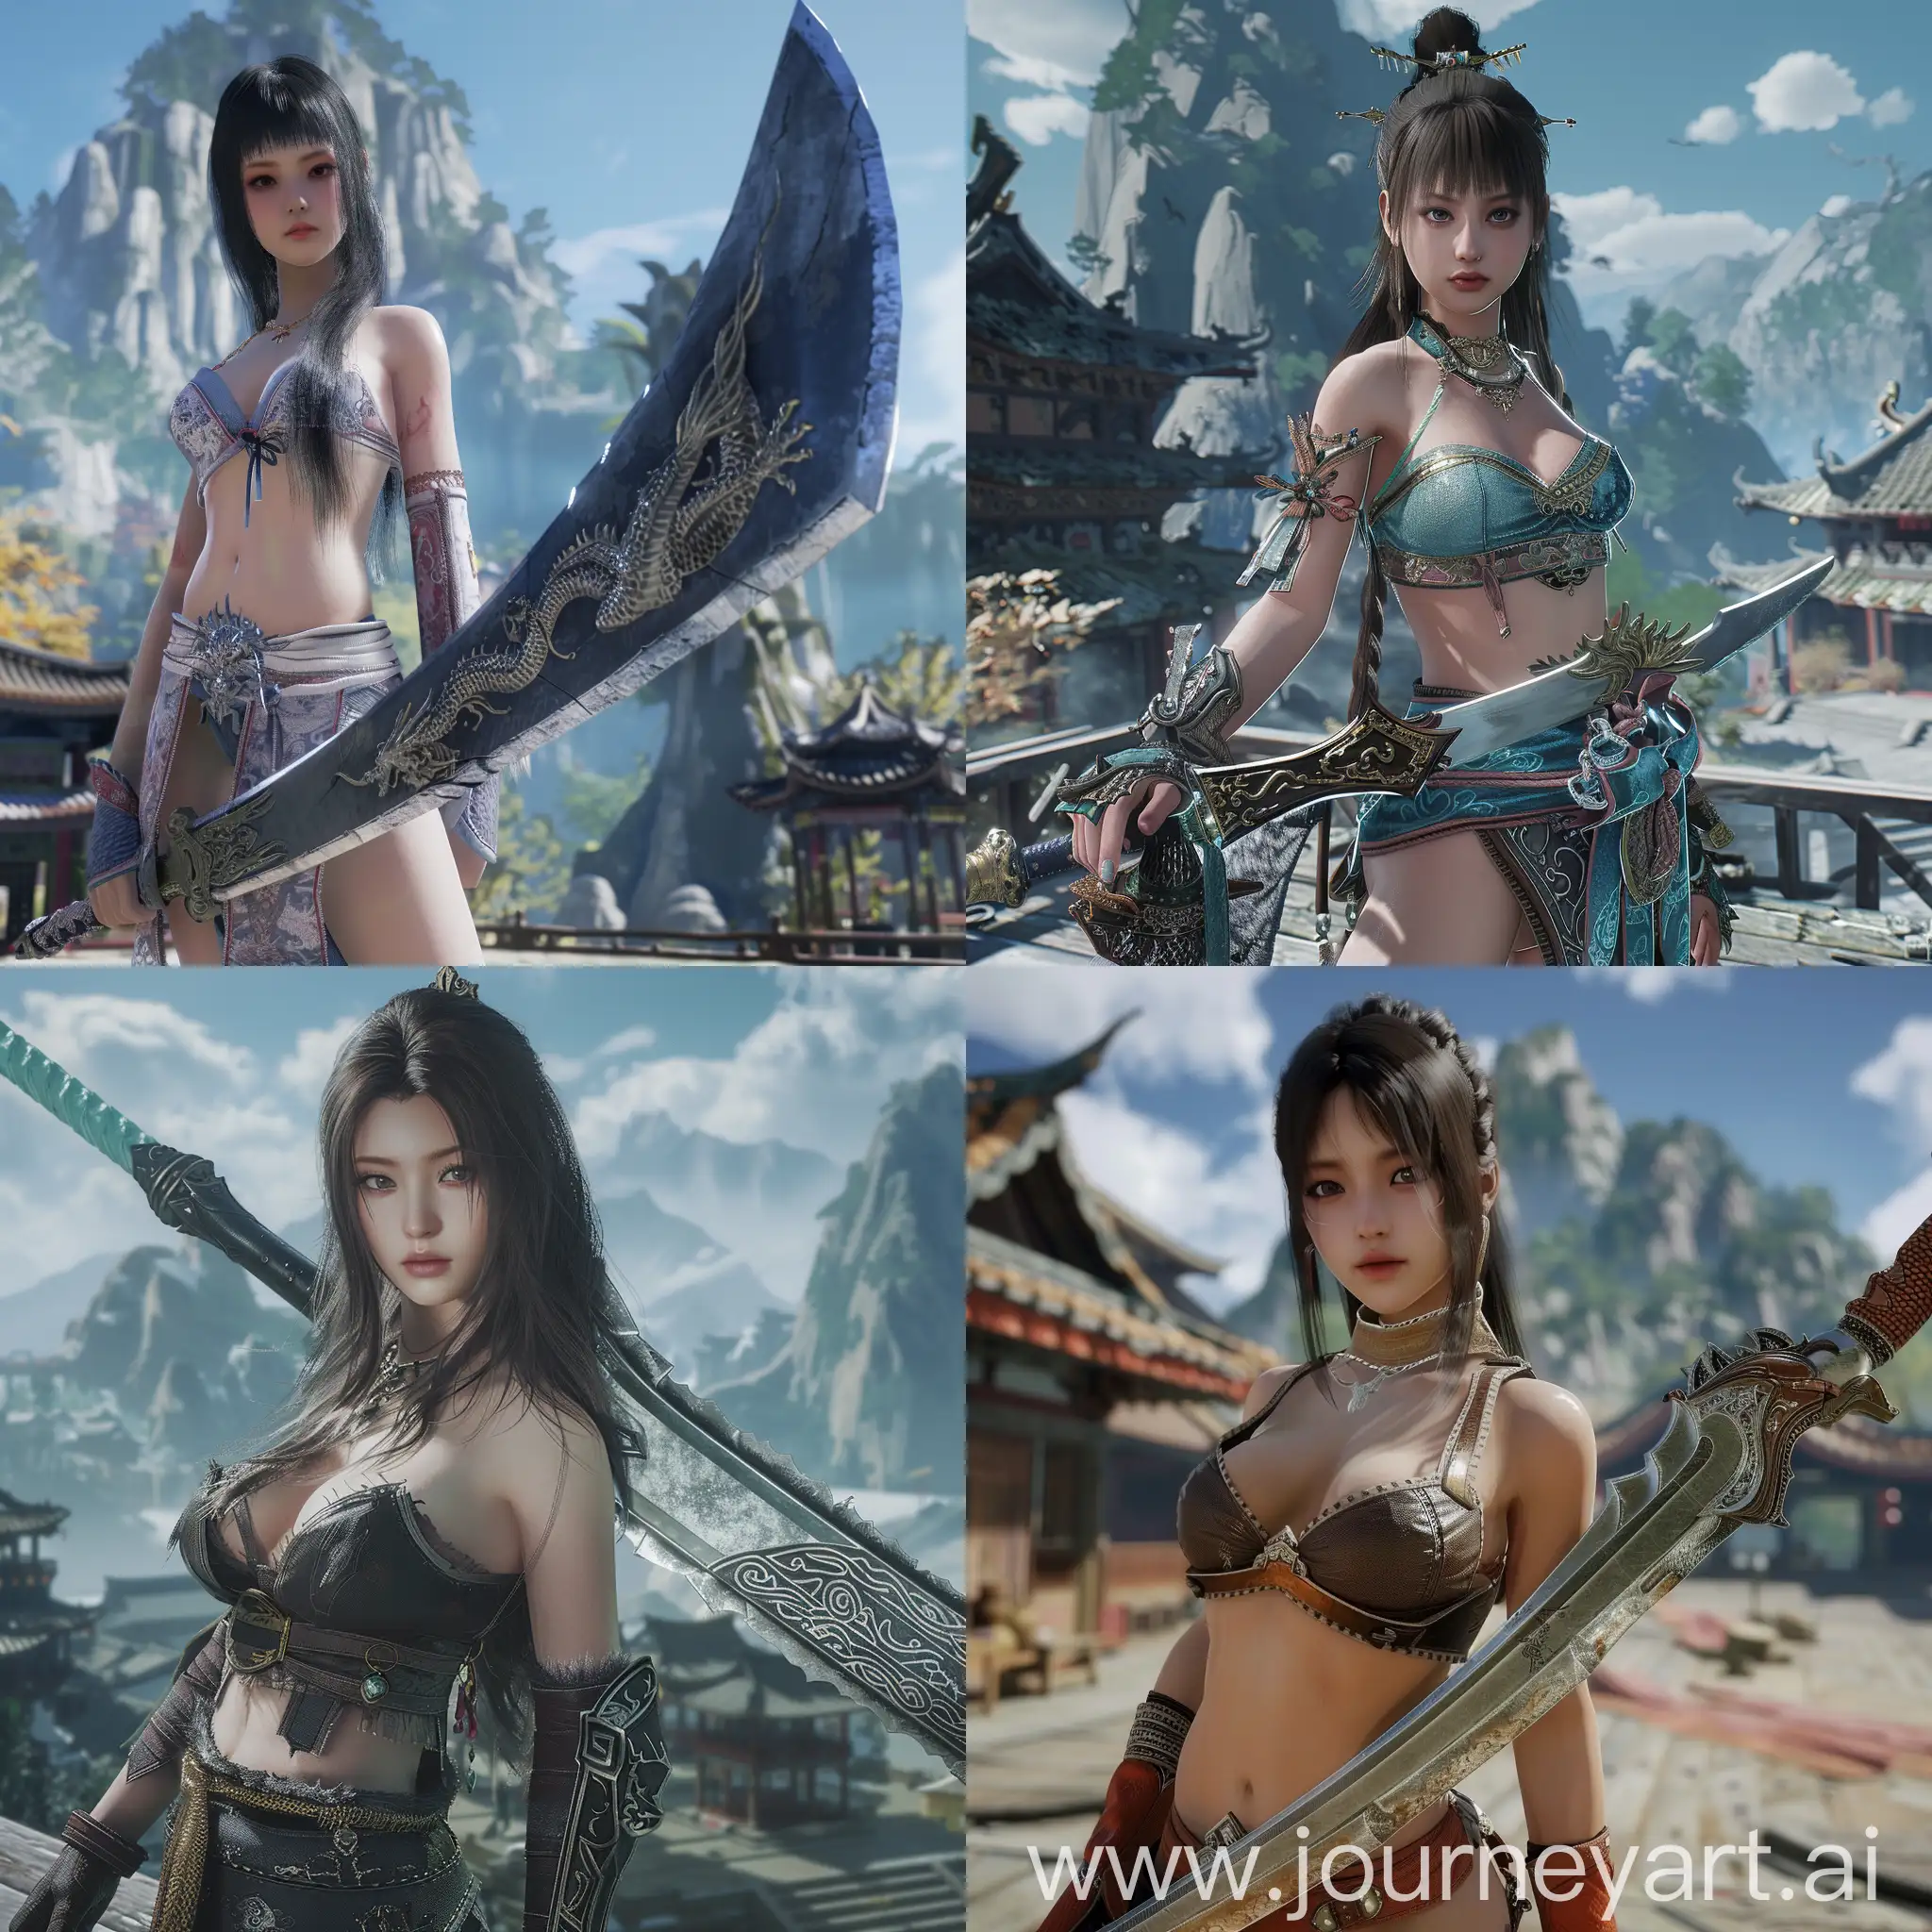 Azure-Sky-with-Chinese-Dragon-and-SwordWielding-Heroine-in-Unreal-Engine-4-Style